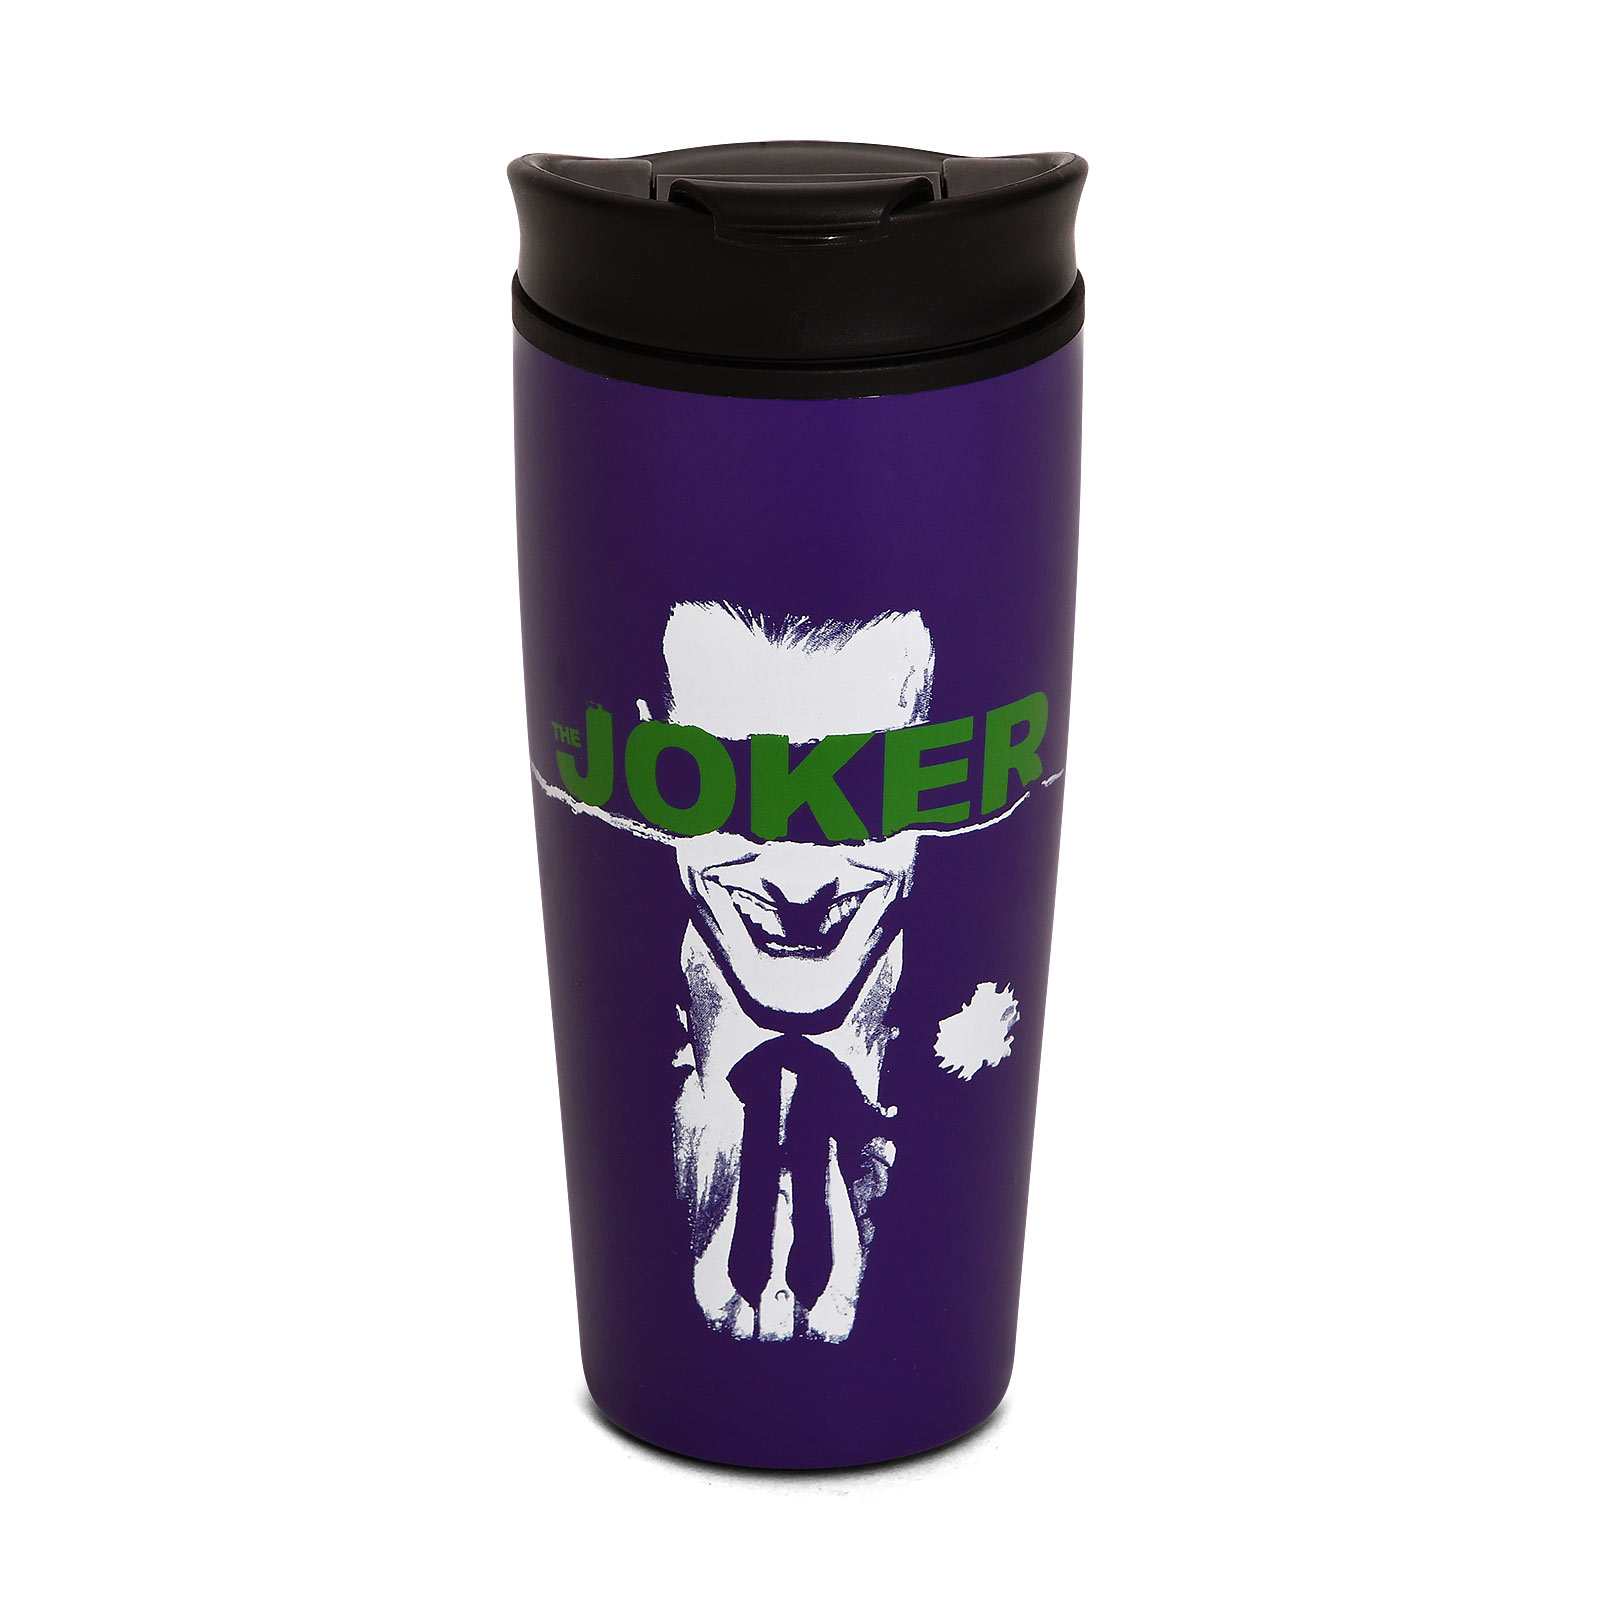 Joker - Straight Outta Arkham To Go Cup